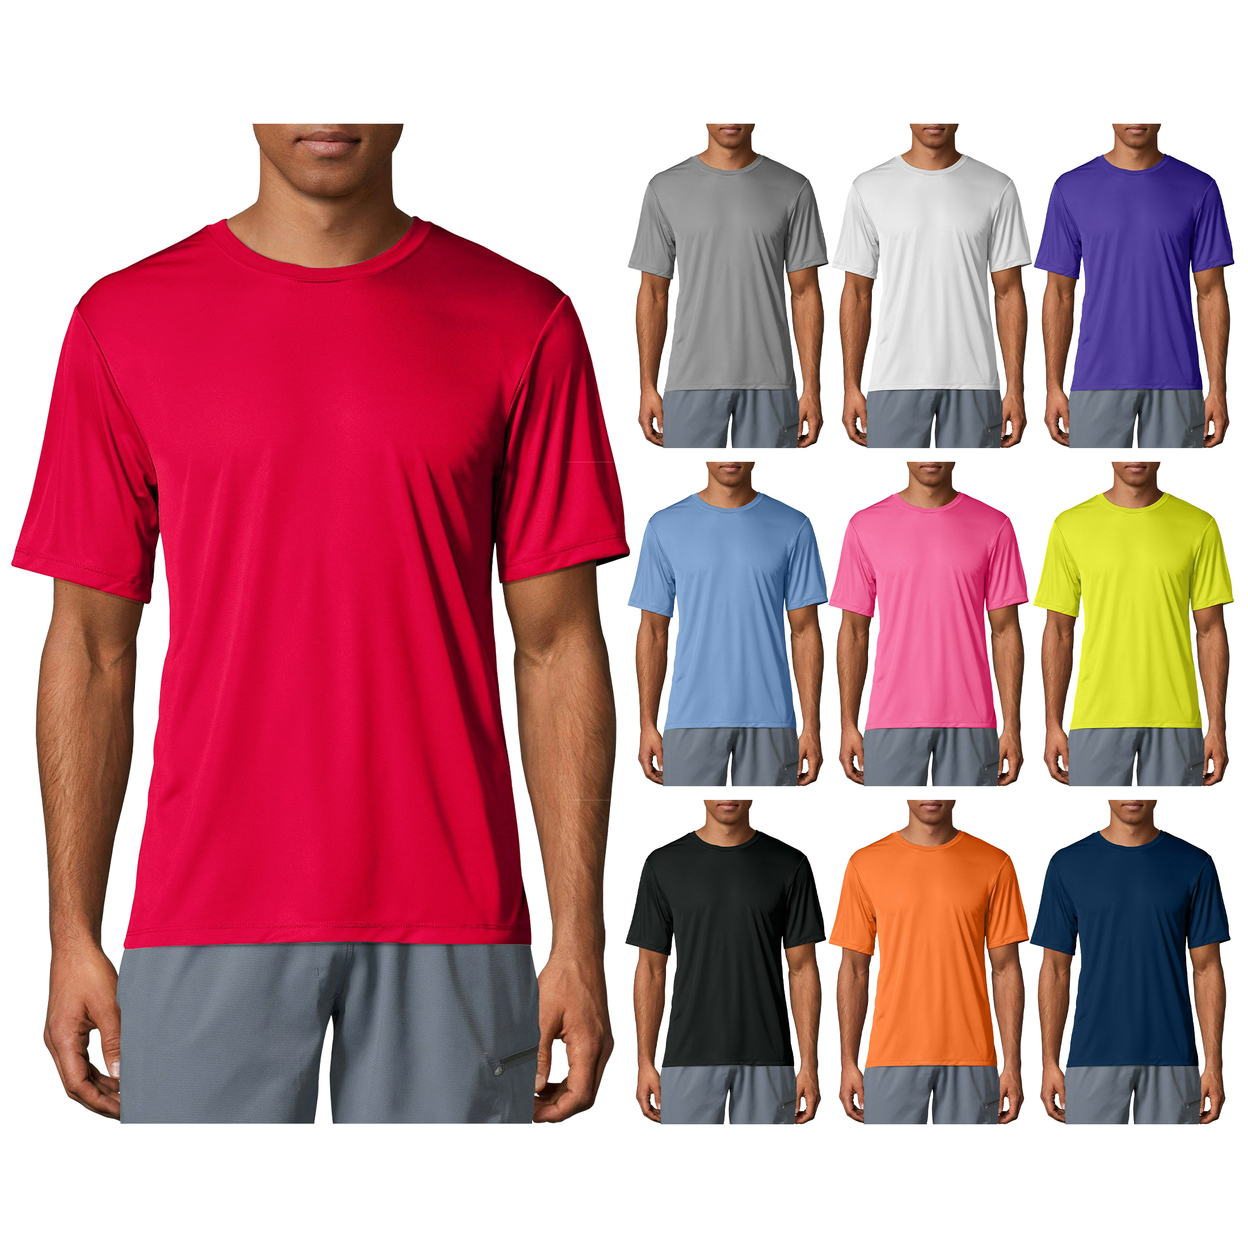 3-Pack: Men's Moisture Wicking Cool Dri-Fit Performance Short Sleeve Crew Neck T-Shirts - X-large